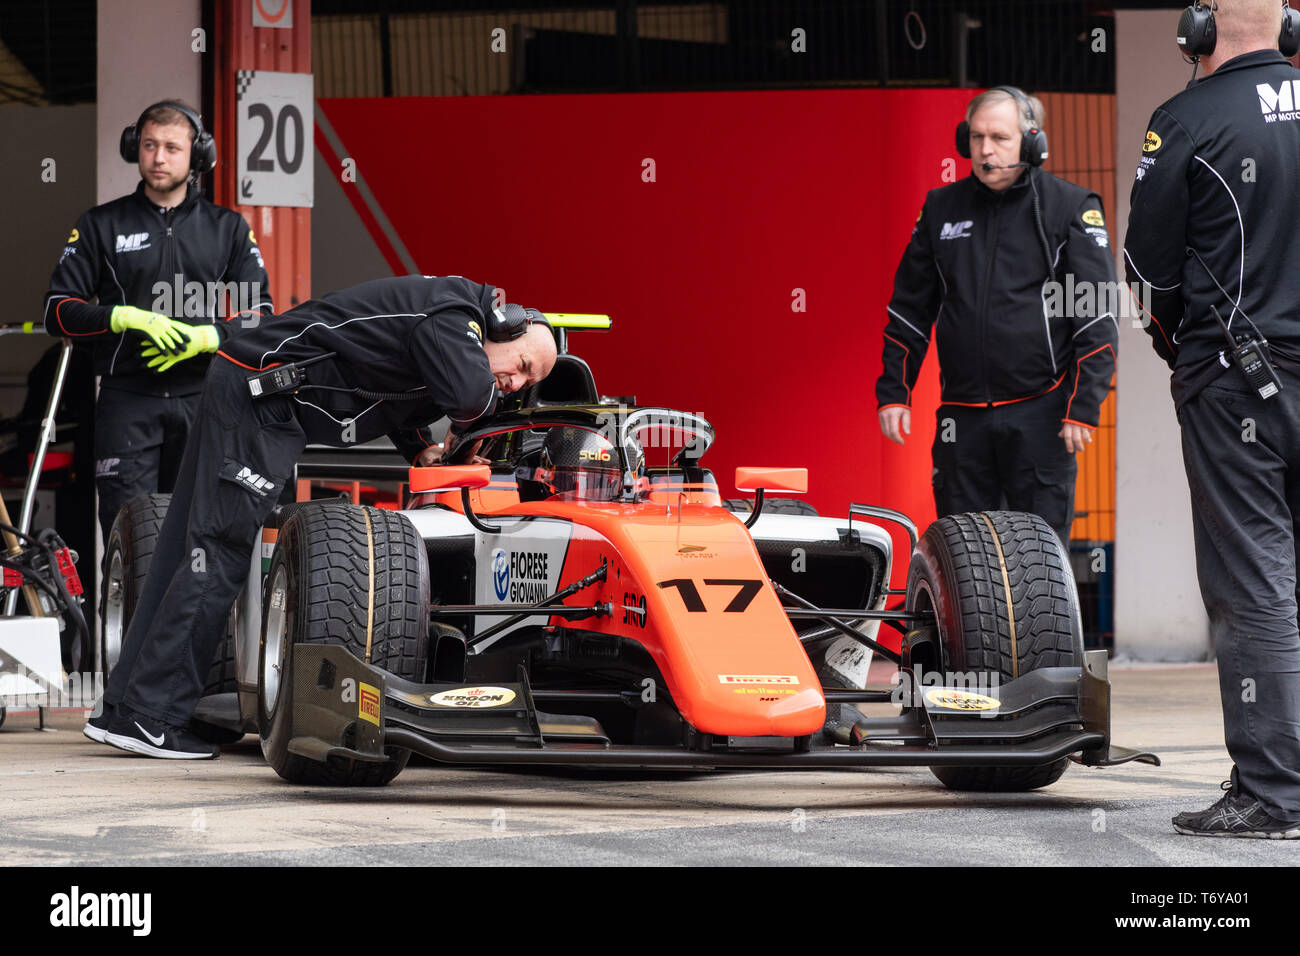 Barcelona, Spain - March 5th, 2019 -  Mahaveer Raghunathan from India with 17 MP Motorsport  - during day 1 of Fia F2 2019 Pre-Season Test at Circuit  Stock Photo